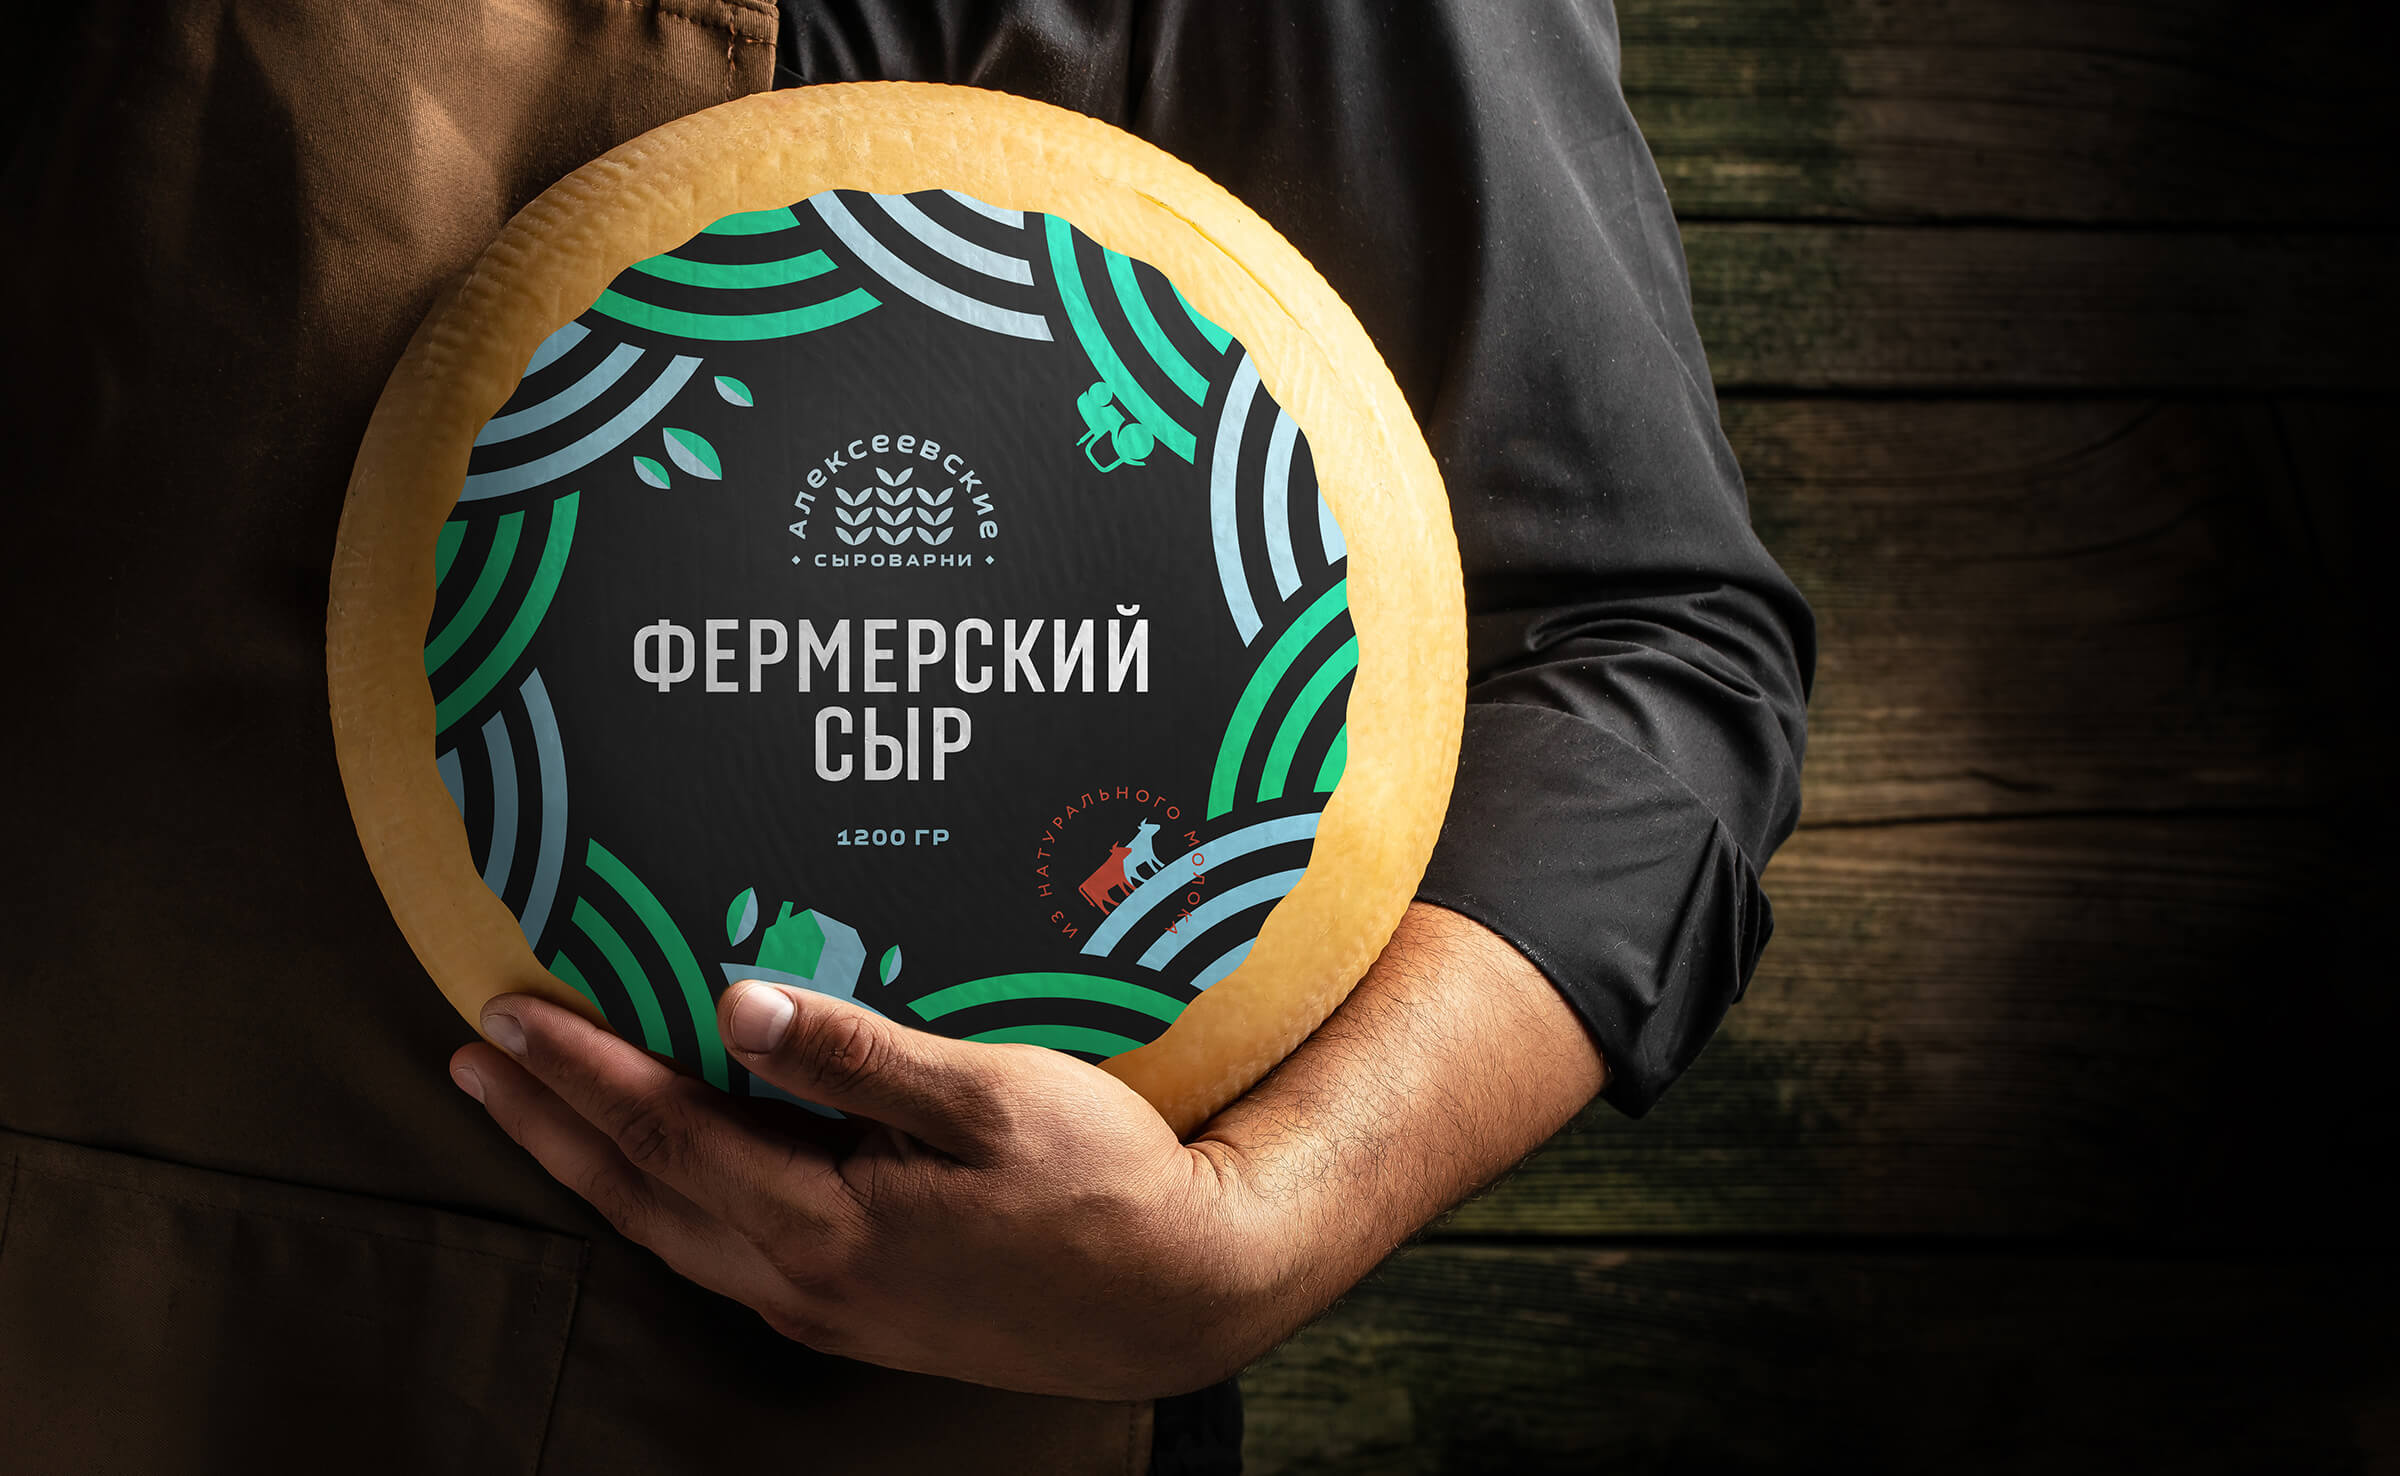 Alekseevsky Cheese Factory Branding and Packaging Design